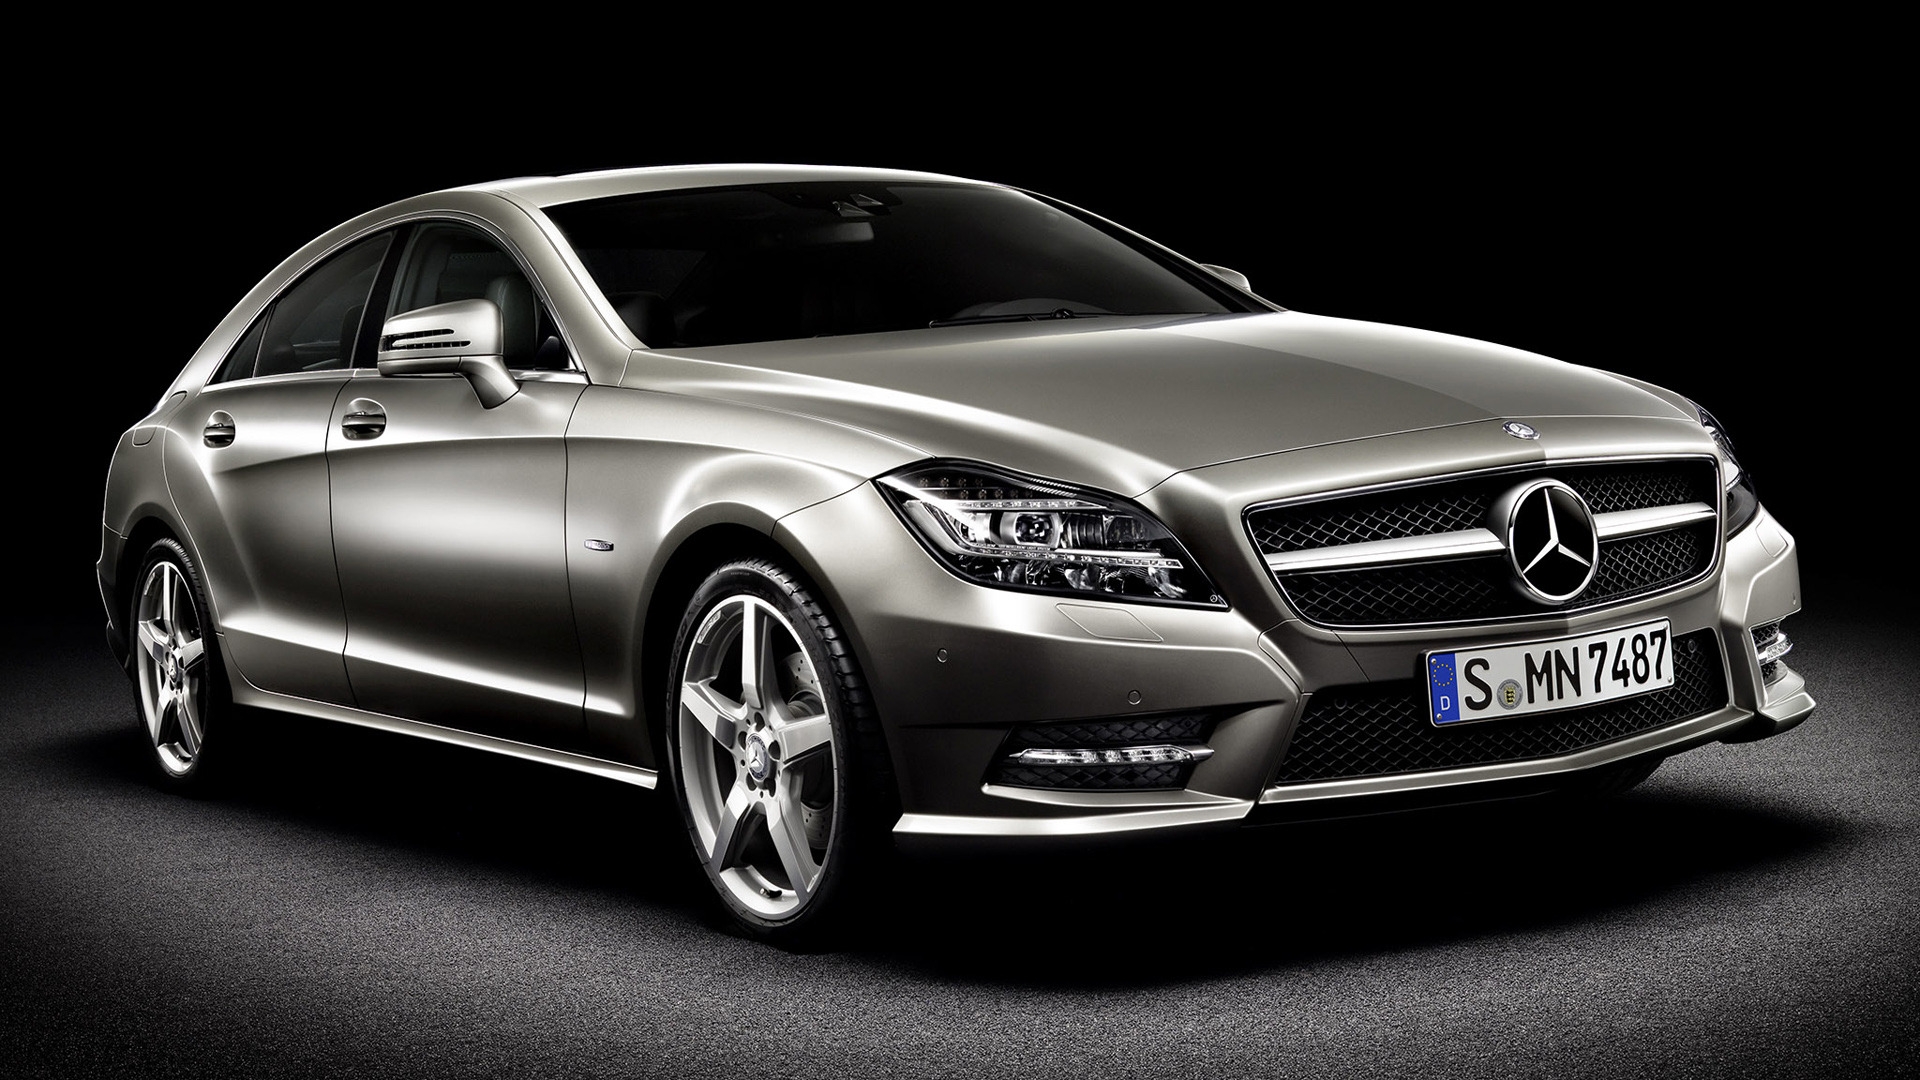 Mercedes CLS 2010 for 1920 x 1080 HDTV 1080p resolution